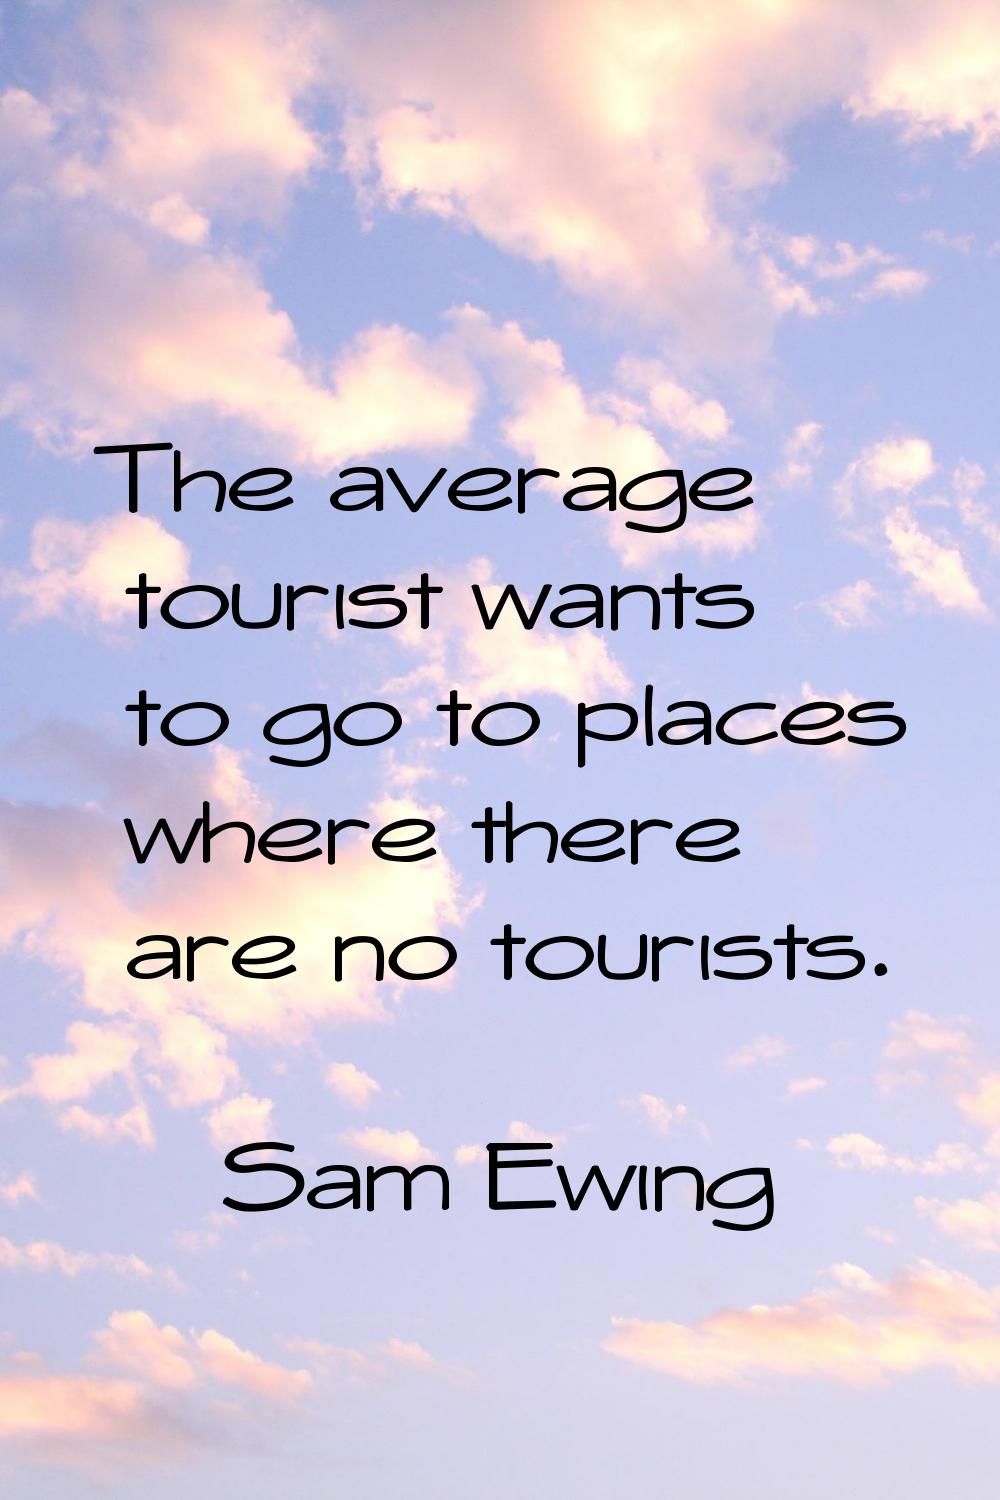 The average tourist wants to go to places where there are no tourists.